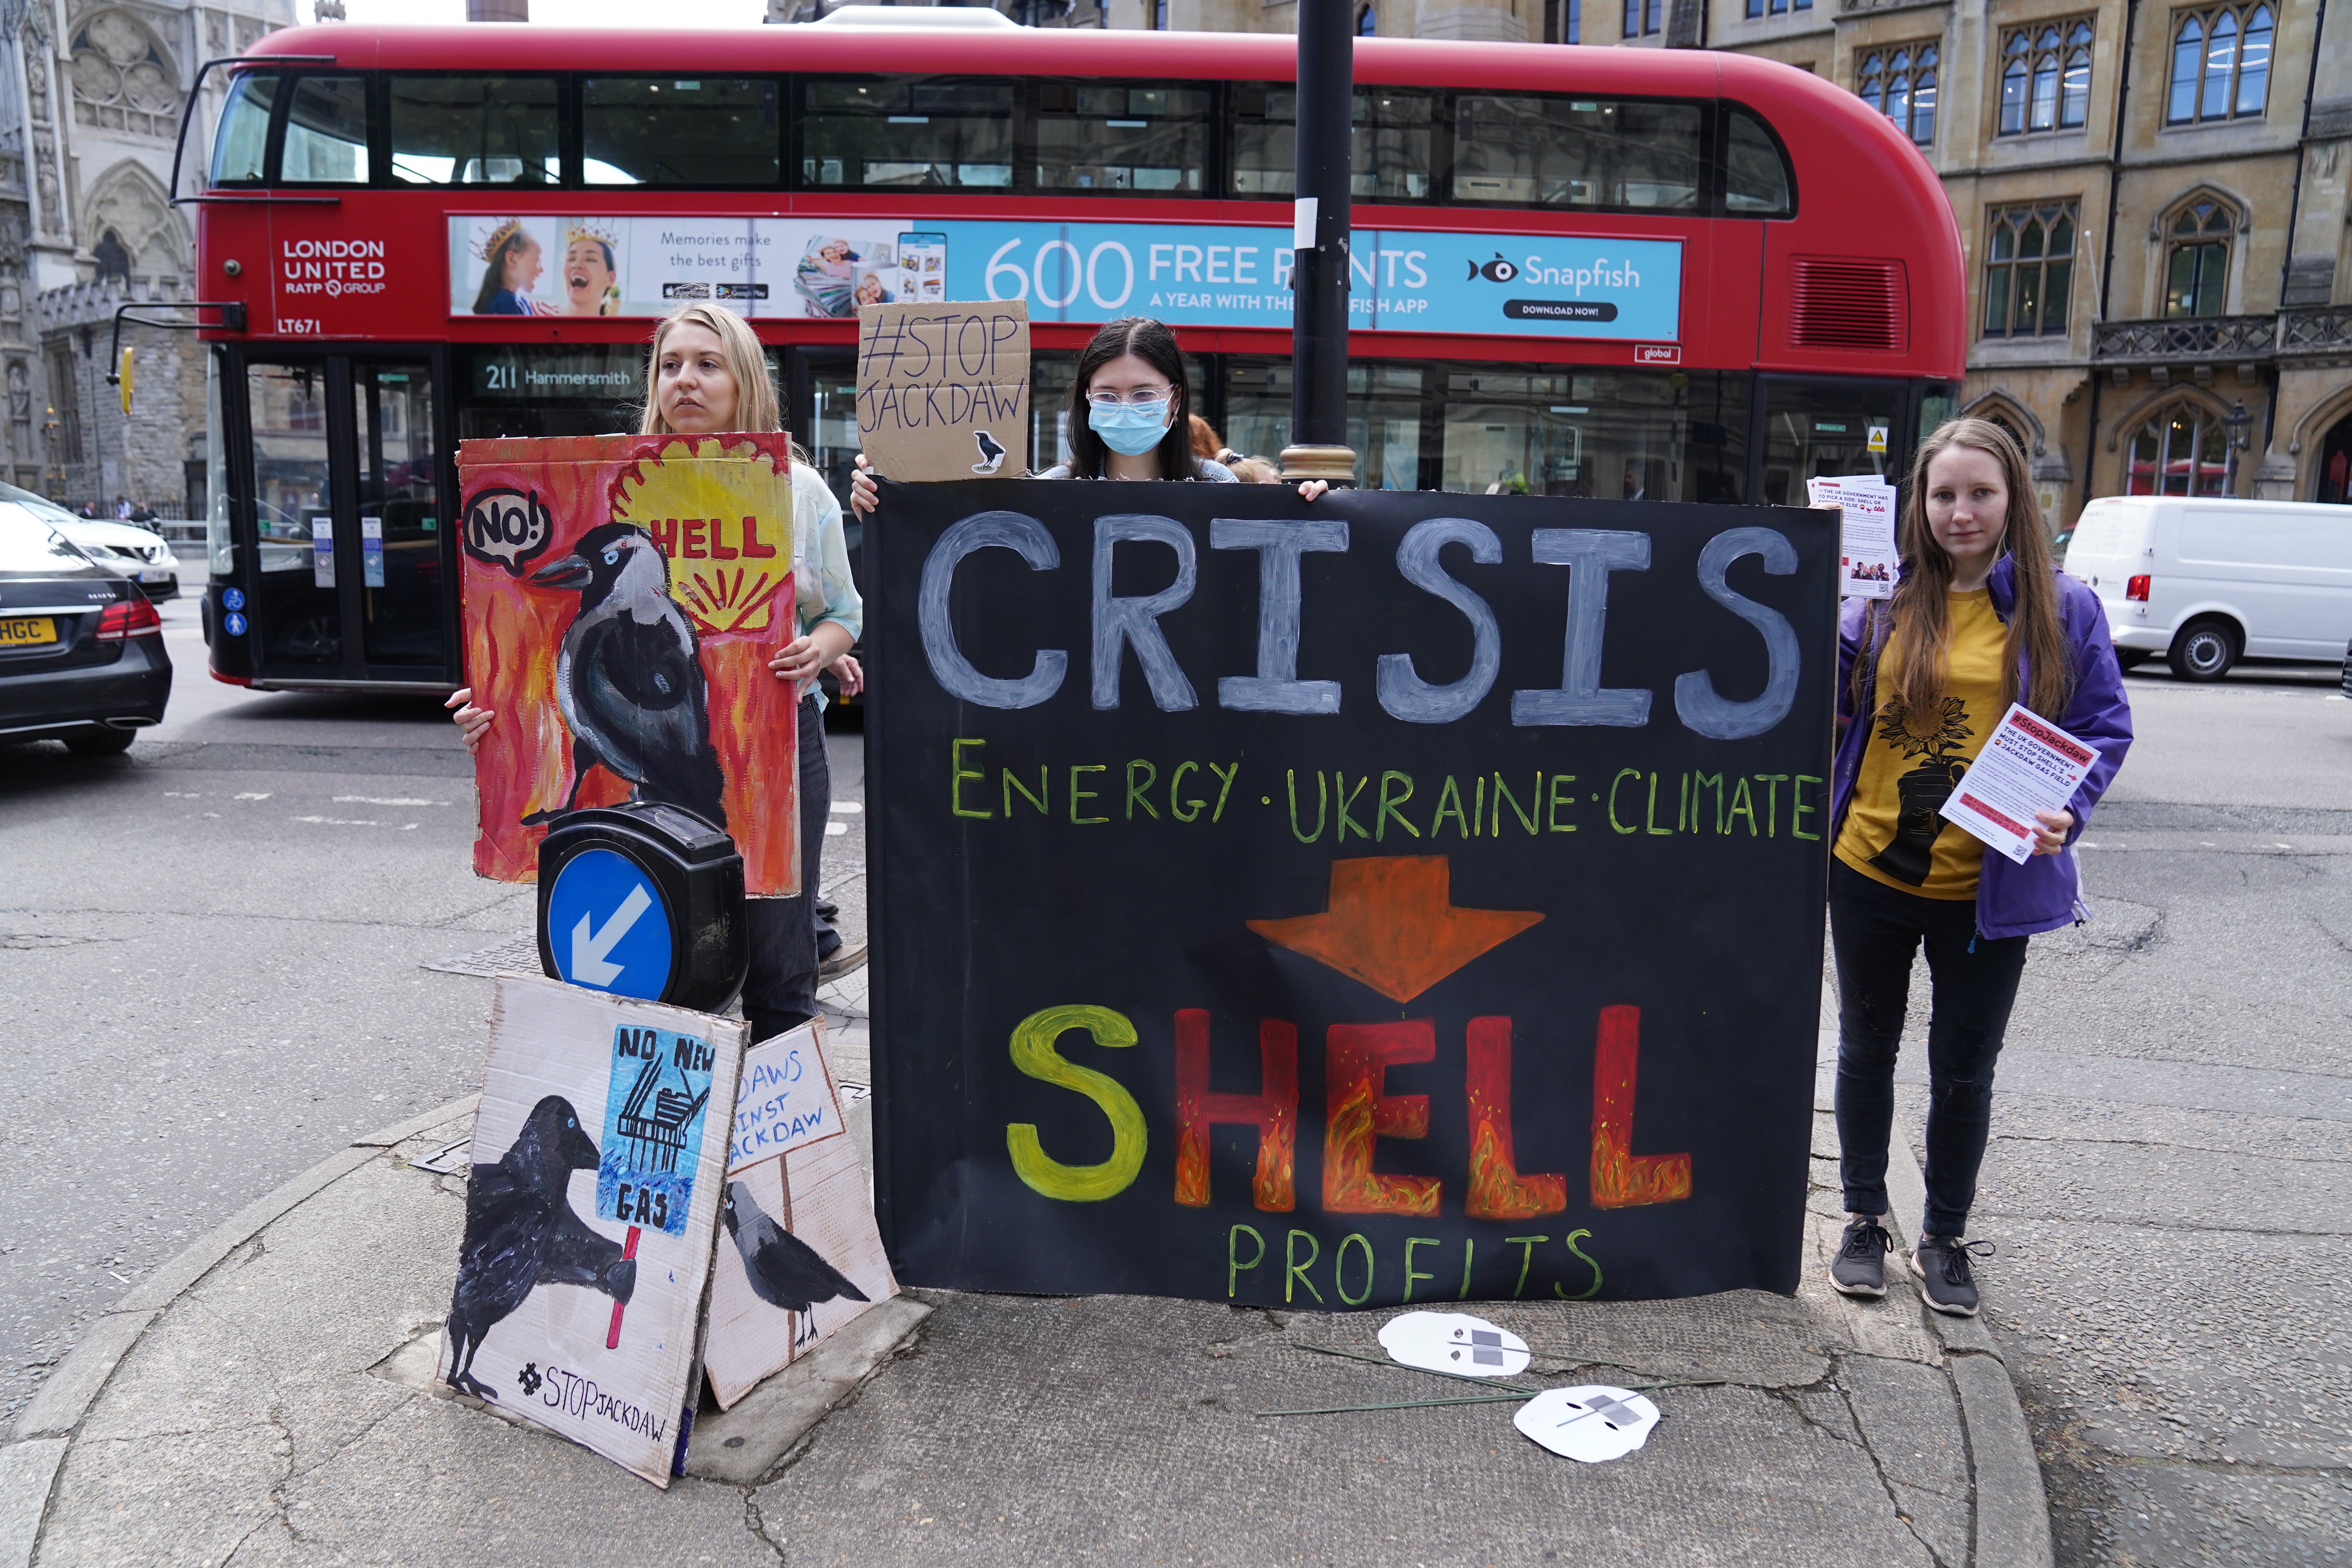 Demonstrators outside Central Hall in Westminster, where Shell’s AGM was taking place (Stefan Rousseau/PA)